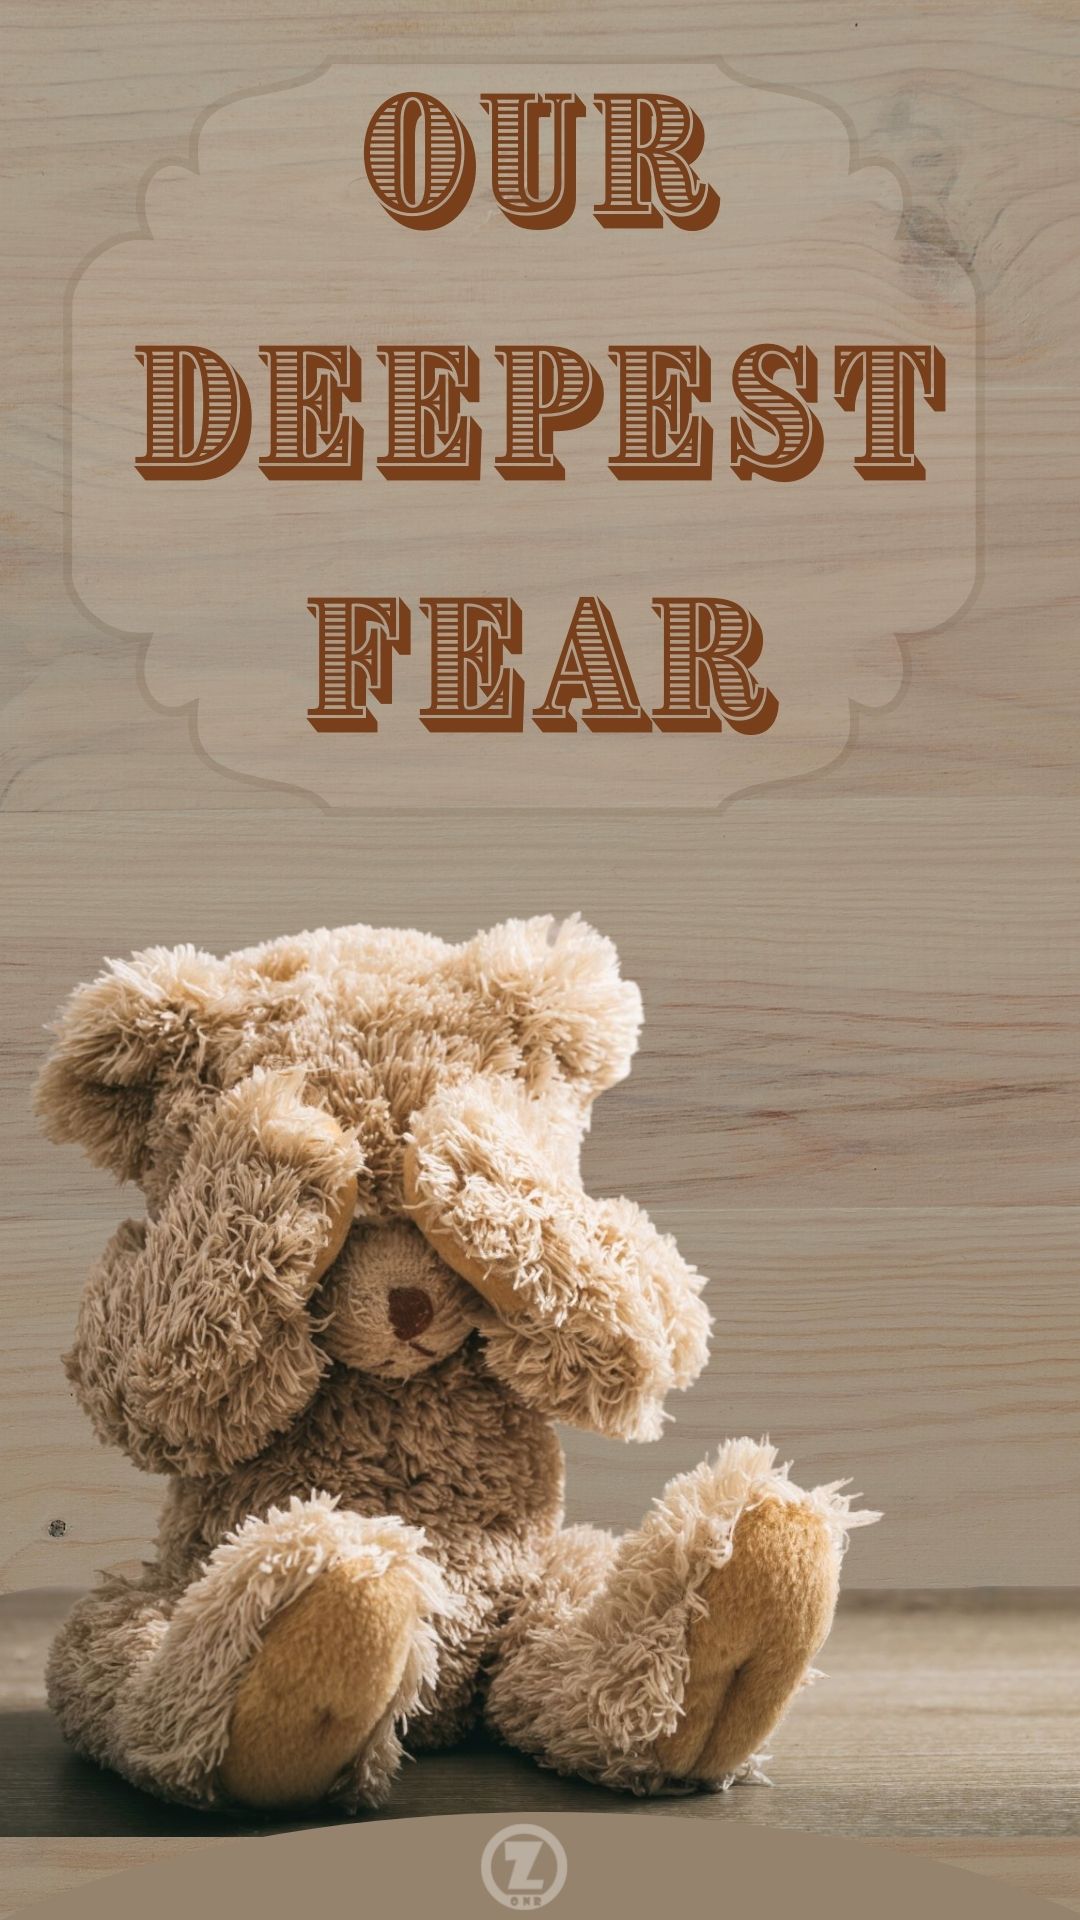 Read more about the article Coming to Terms with “Our Deepest Fear” – Step 12